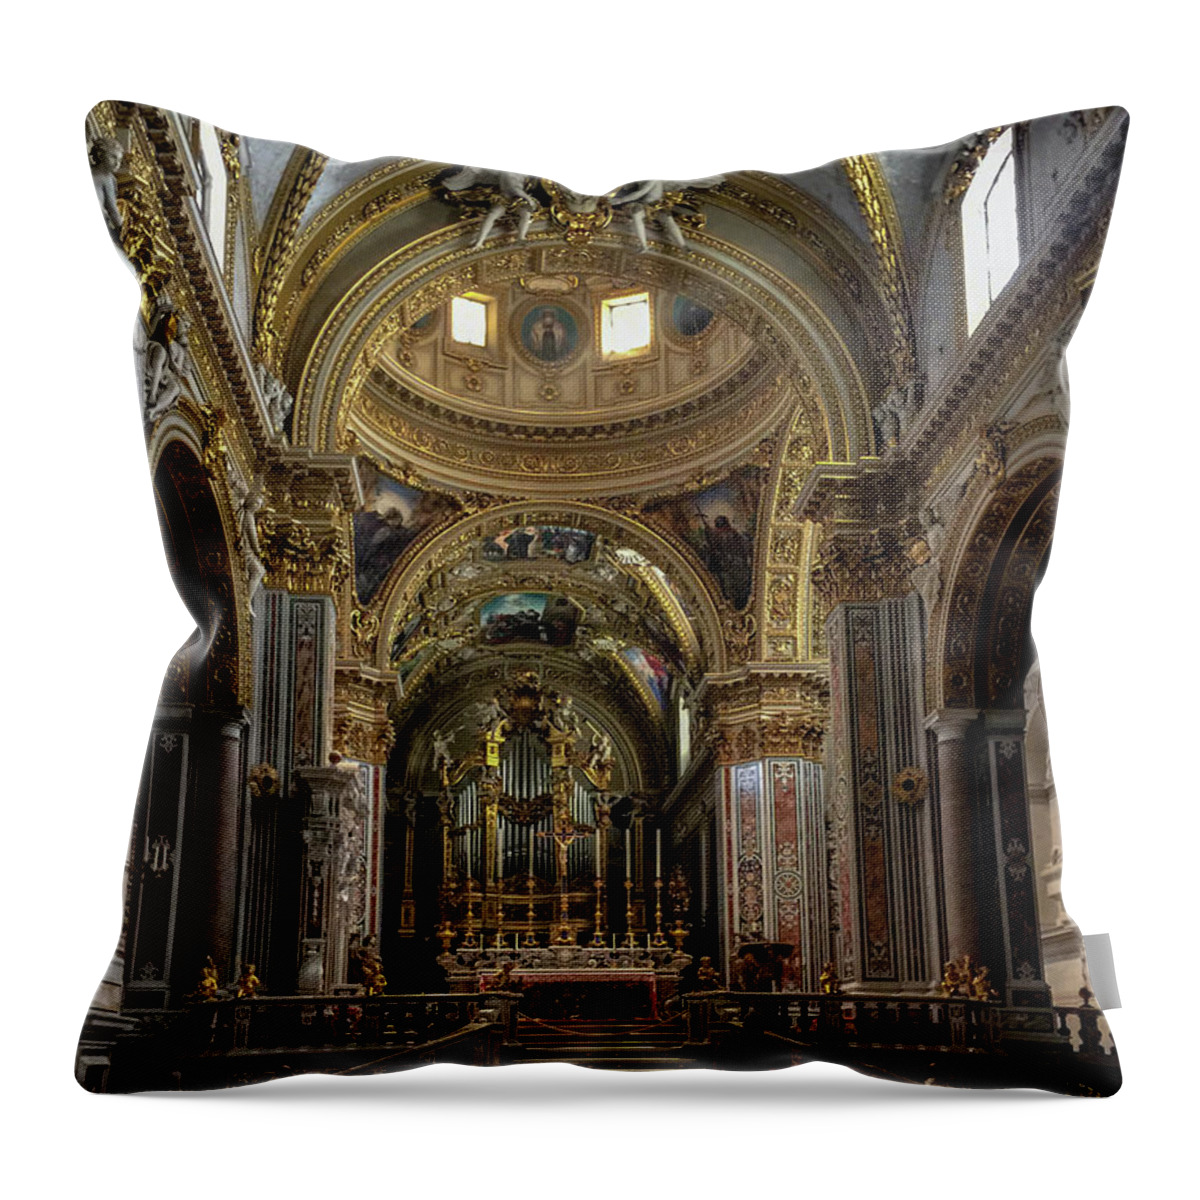 Benedictine Order Throw Pillow featuring the photograph All that Glitters by Joseph Yarbrough